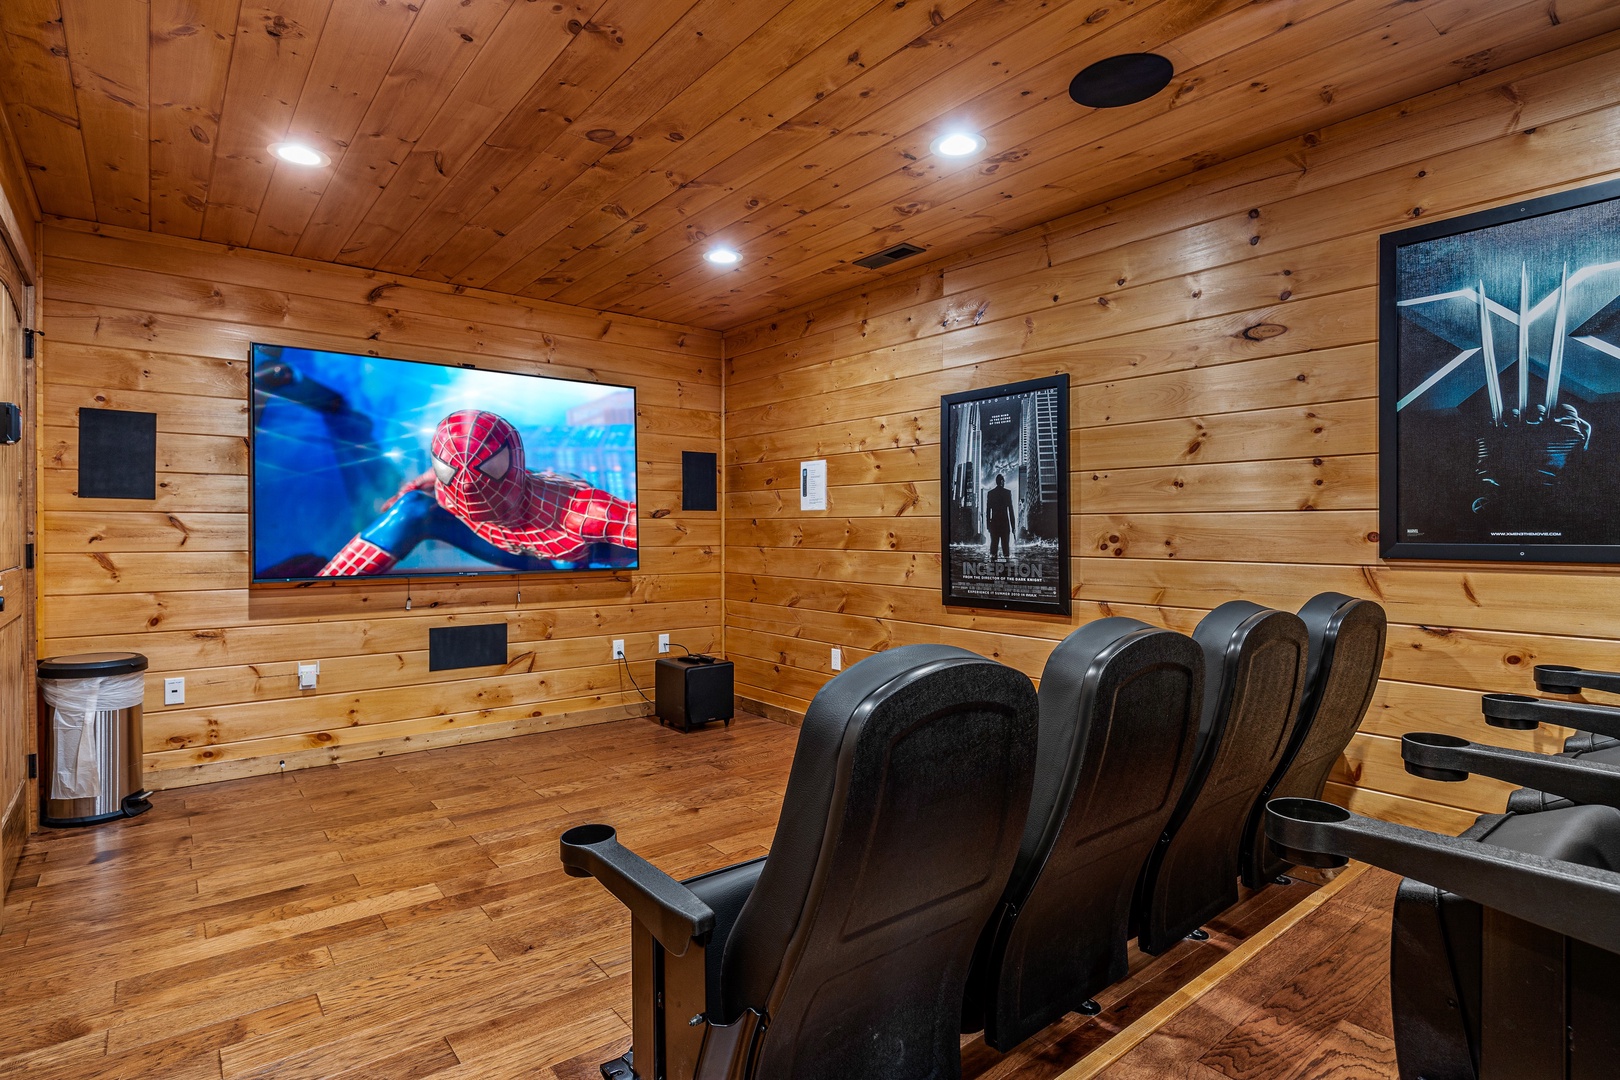 Theater flat screen at Four Seasons Grand, a 5 bedroom cabin rental located in Pigeon Forge